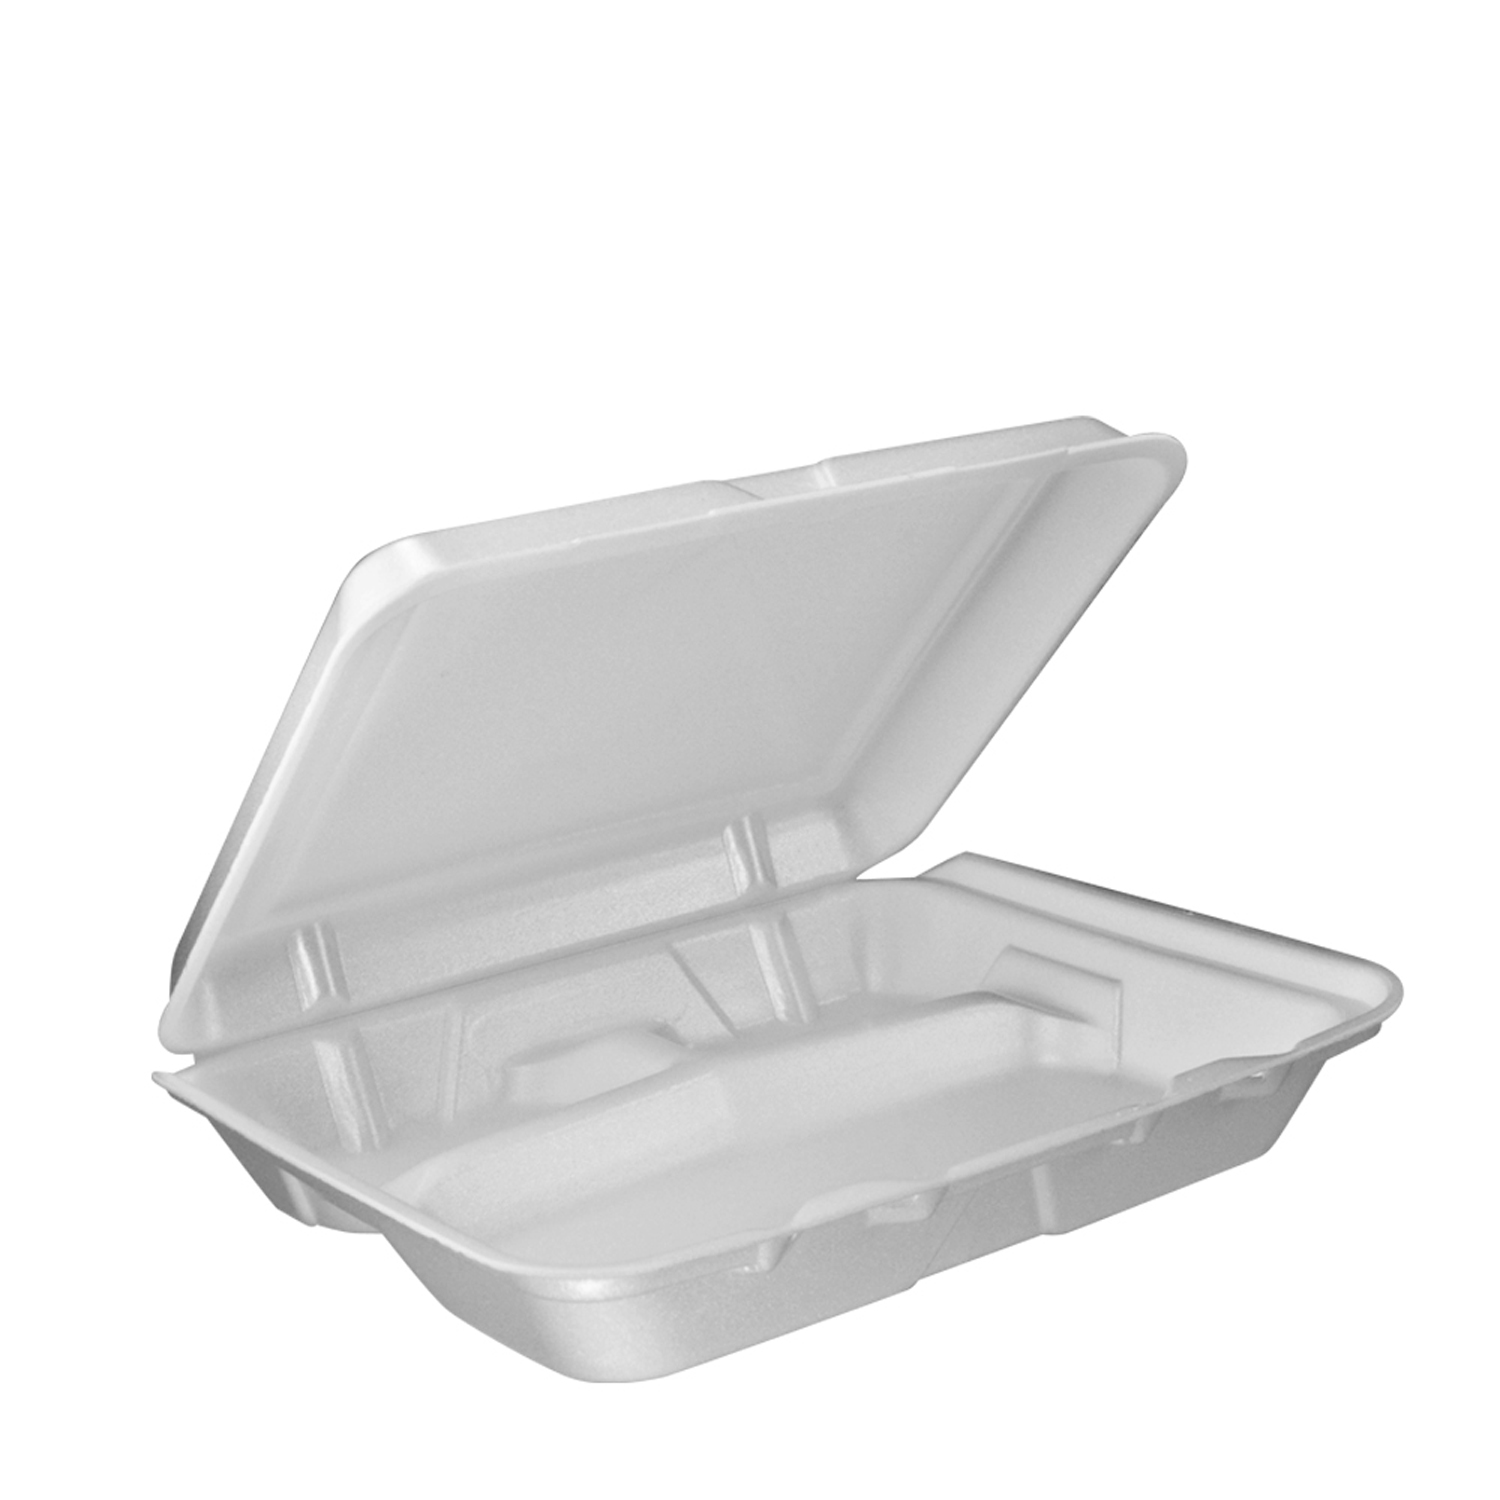 LARGE 3 COMPARTMENT HINGE TRAY(REMOVABLE LID) 200